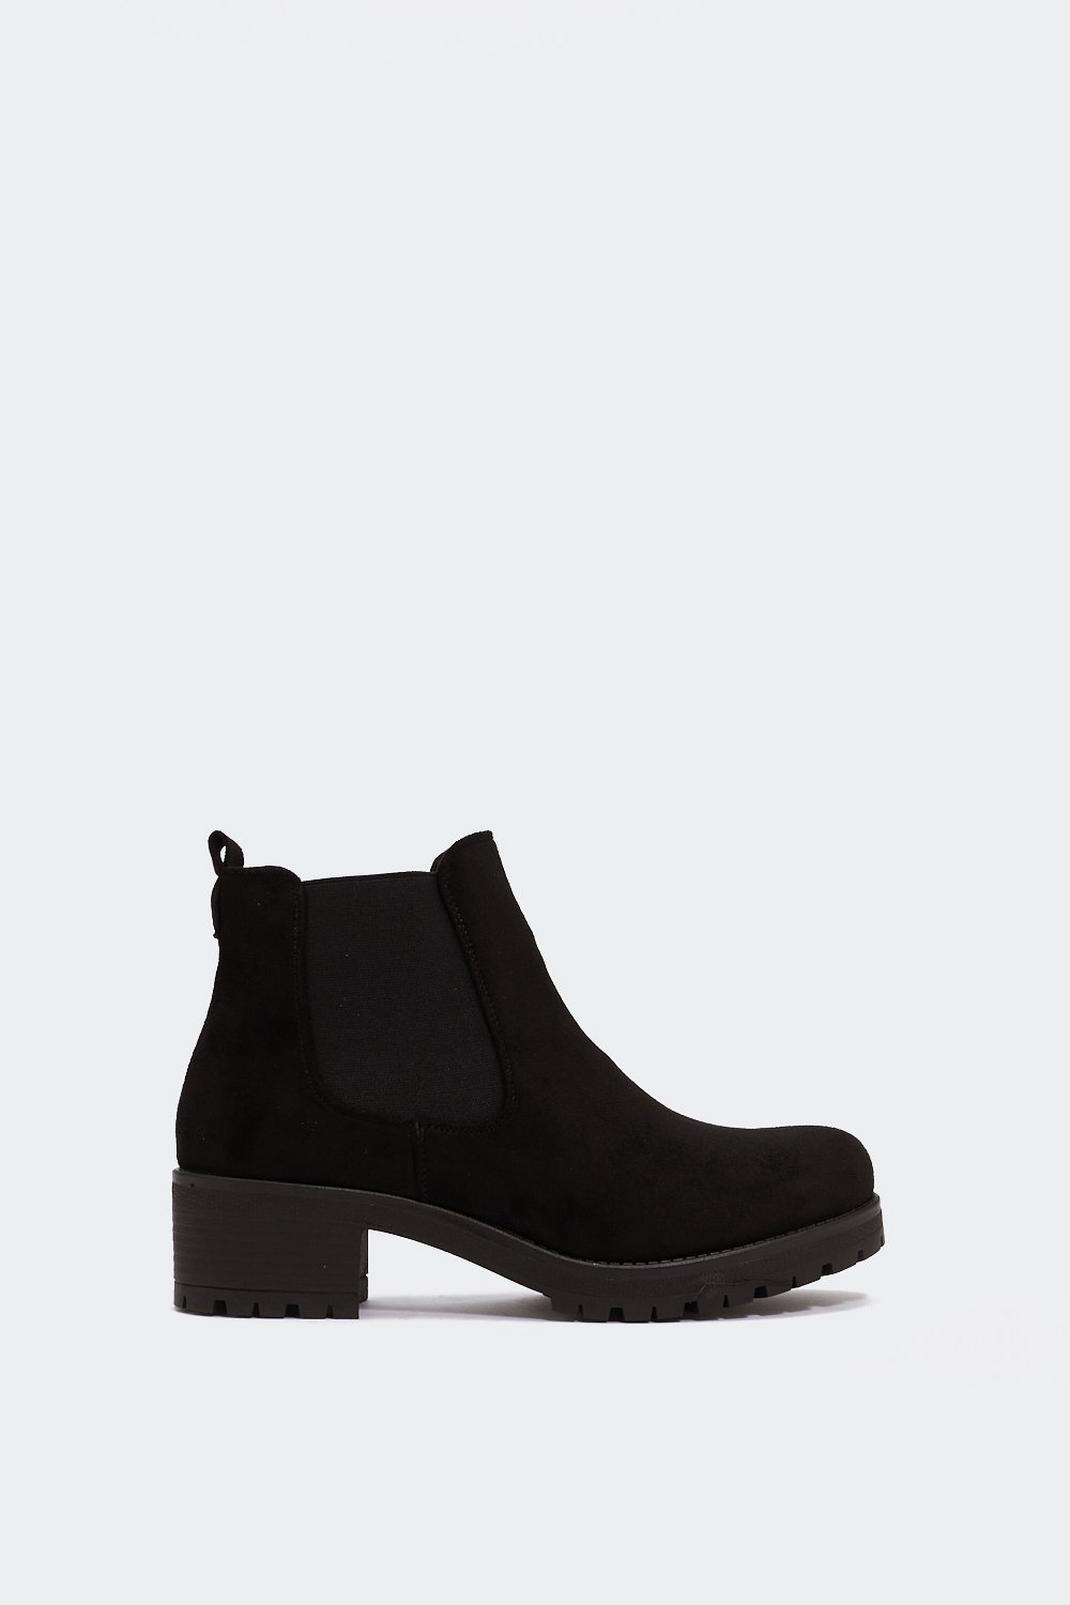 Suited and Booted Chelsea Boot | Nasty Gal